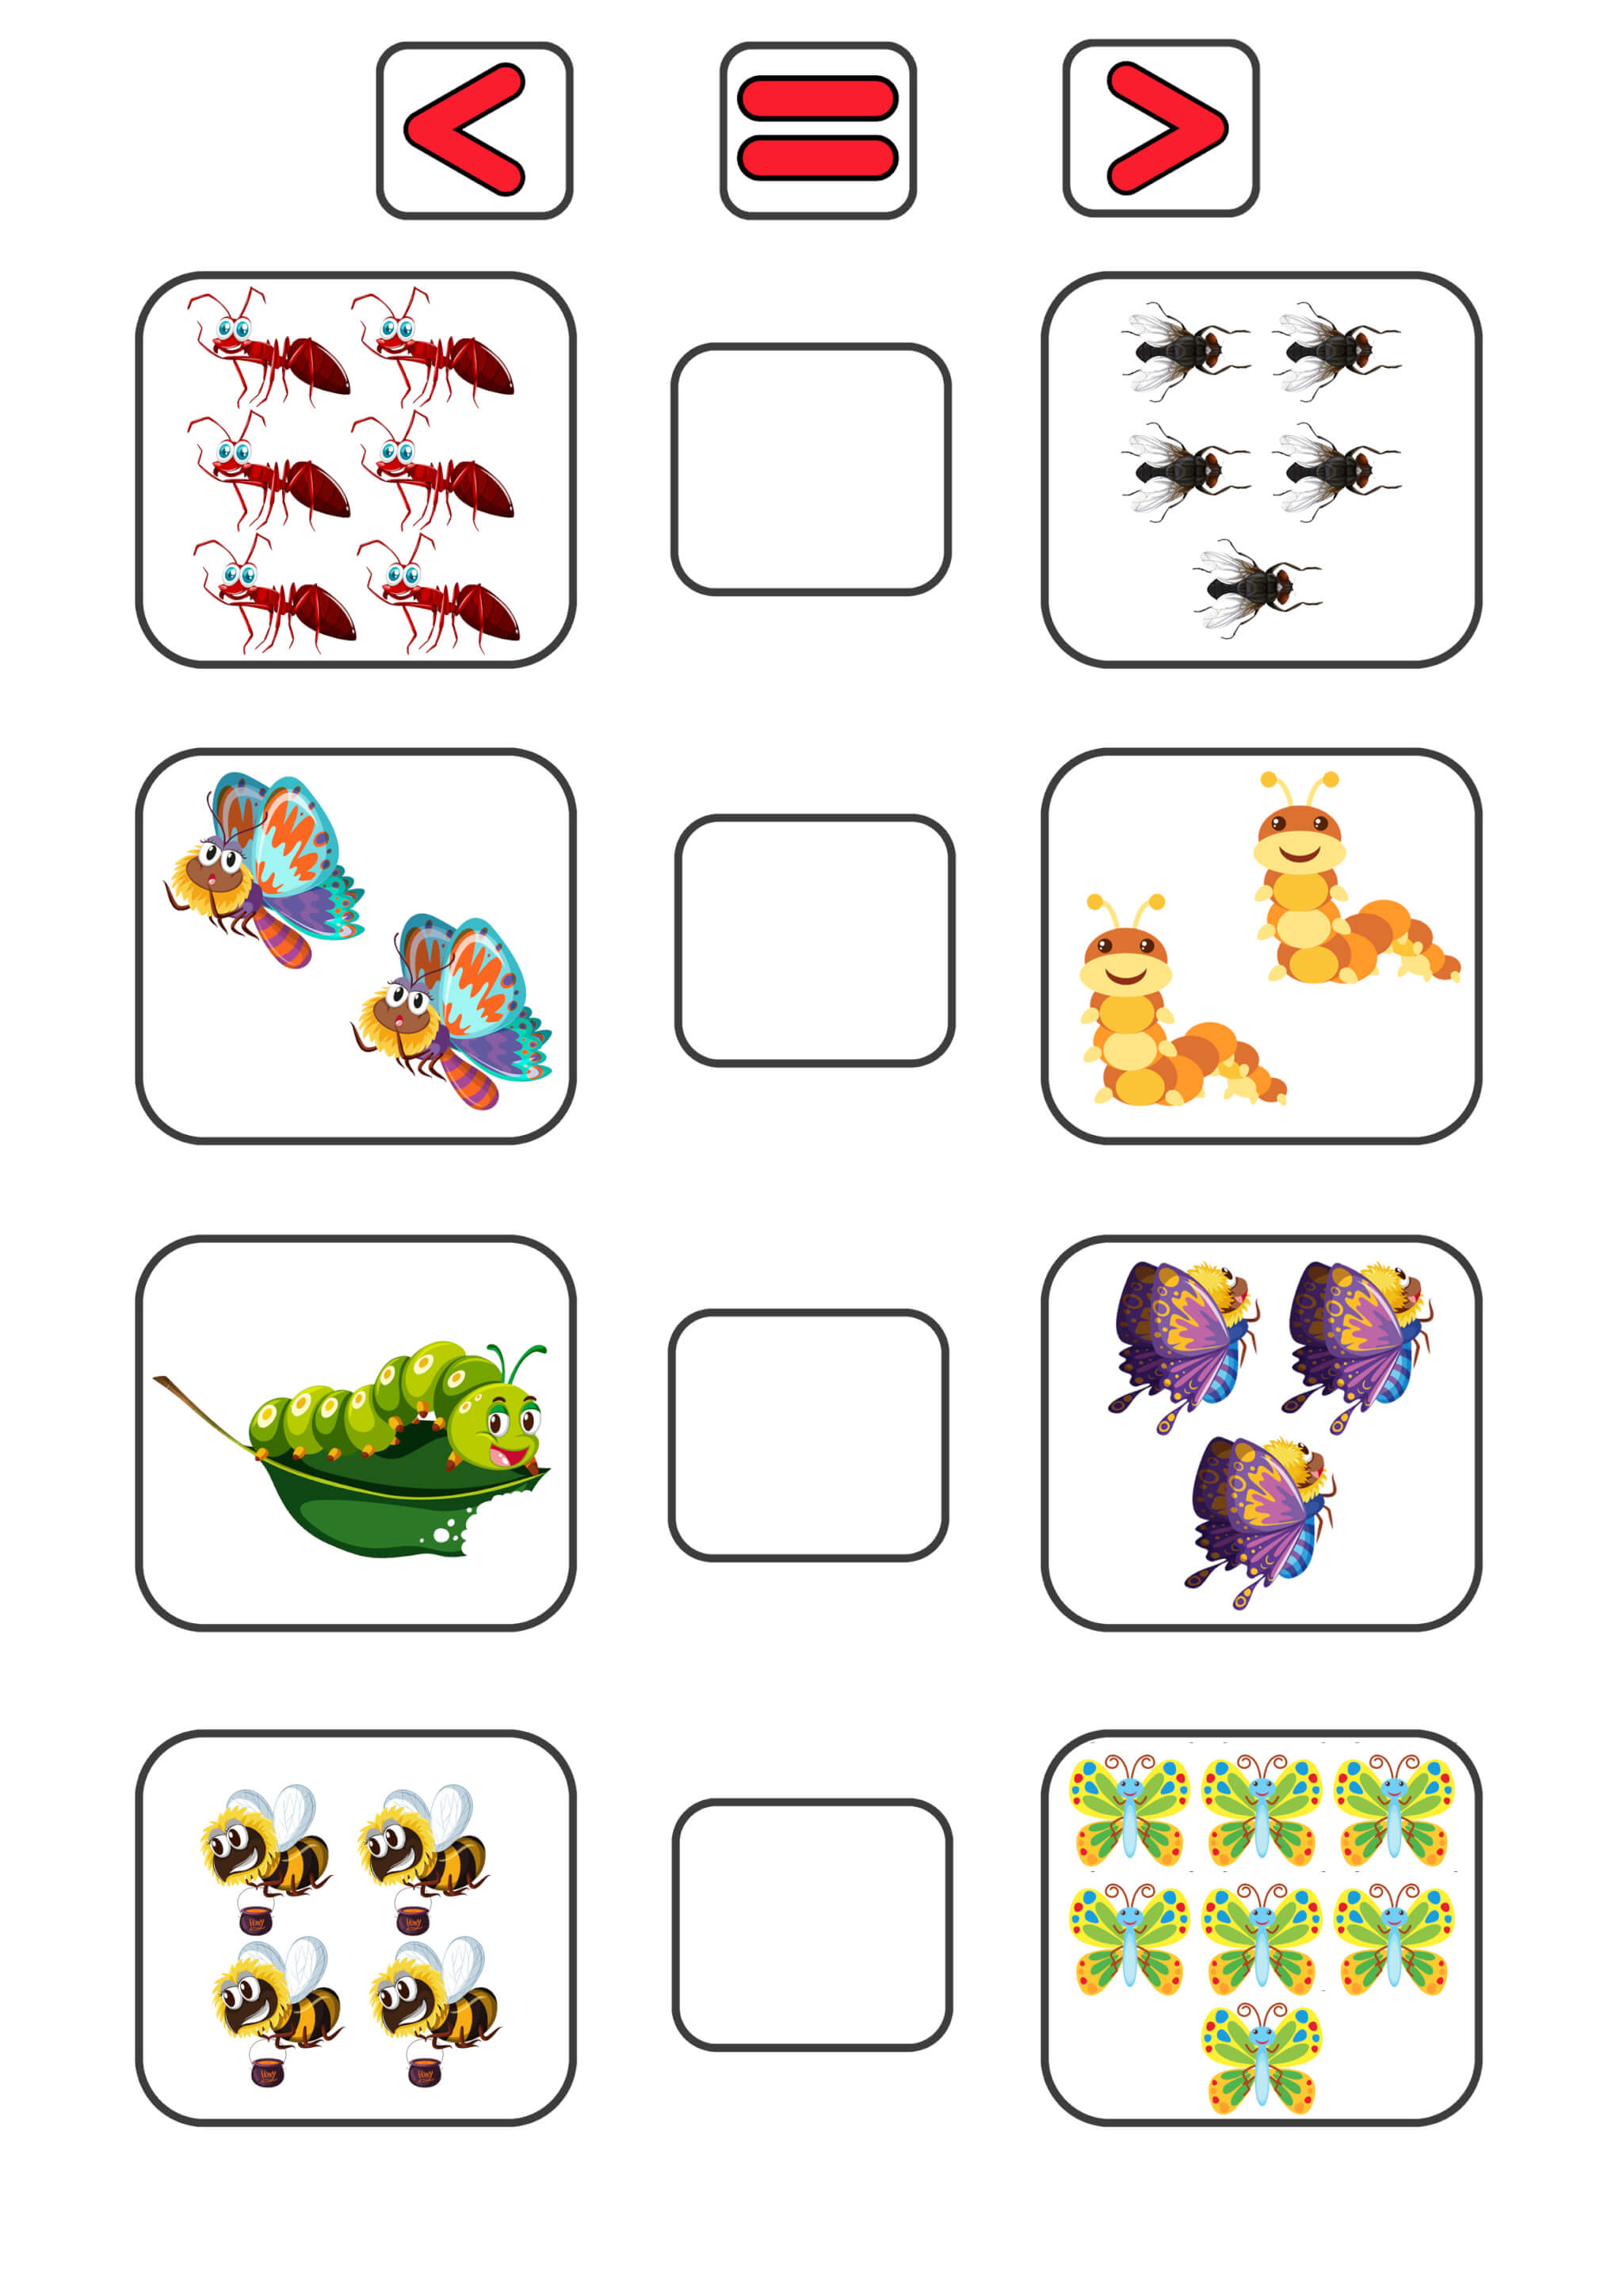 Worksheet Comparing Numbers Insects - Image 3